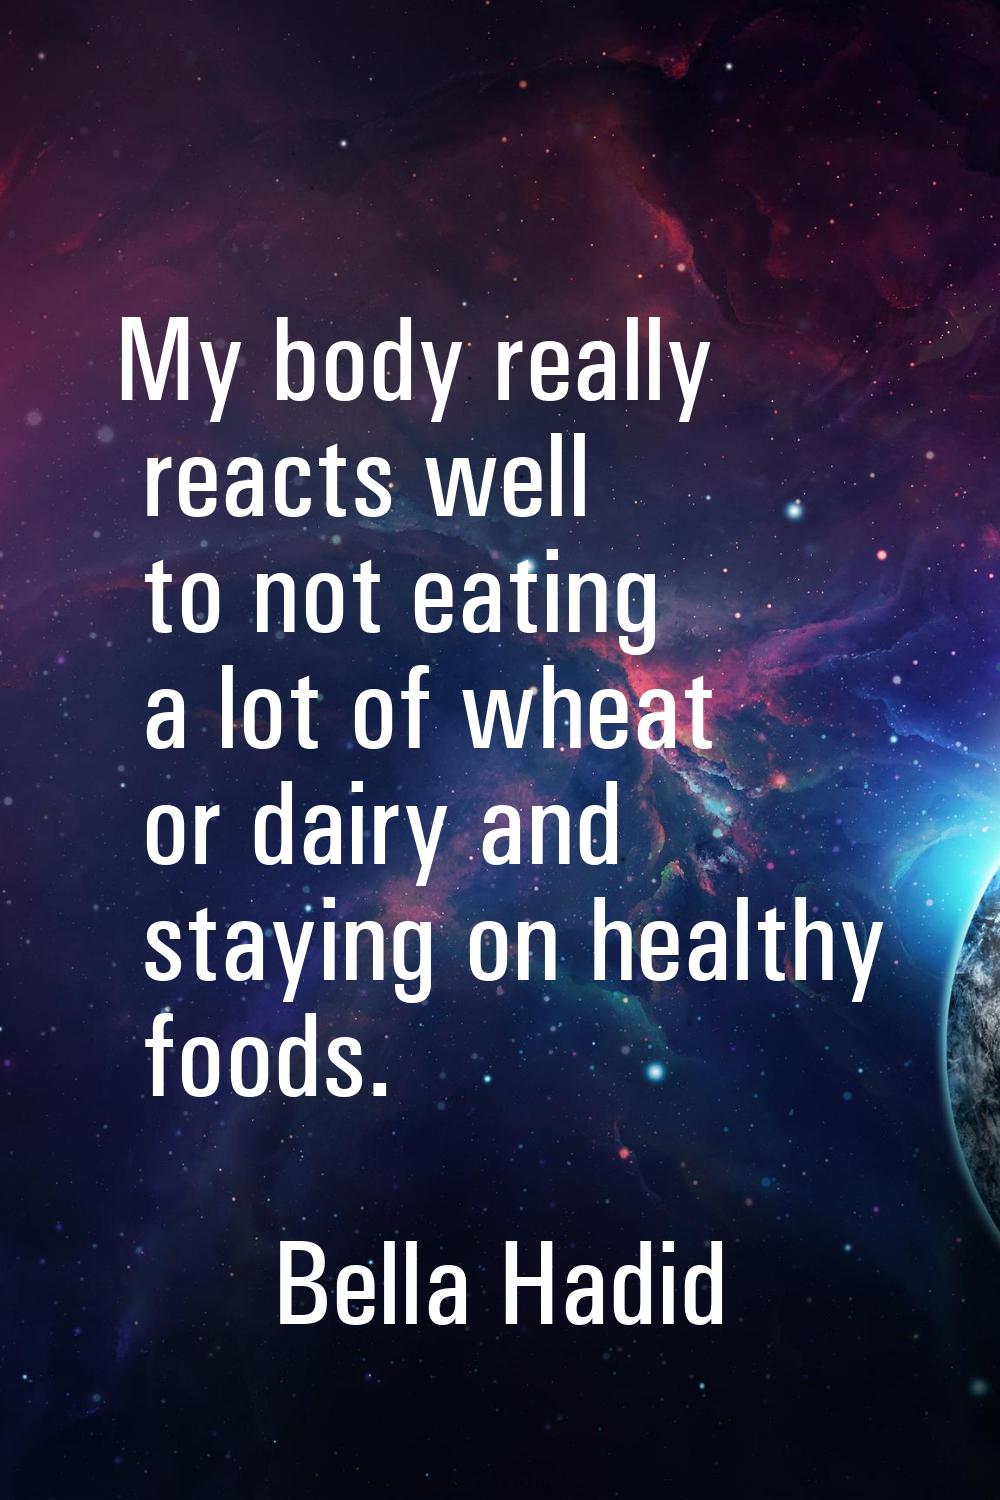 My body really reacts well to not eating a lot of wheat or dairy and staying on healthy foods.